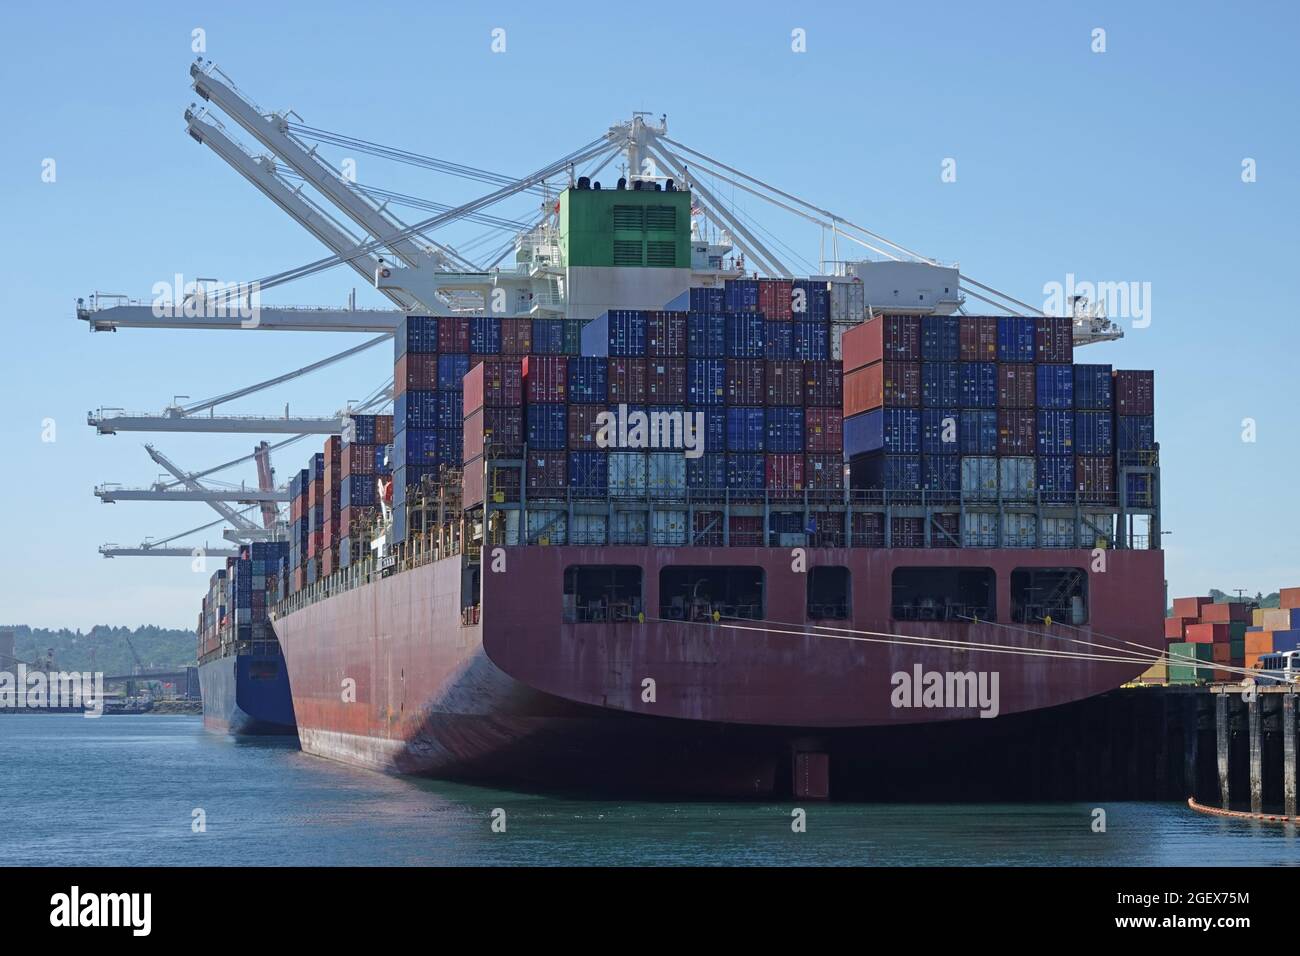 Two large container ships are shown dock in a port next to industrial cranes. Stock Photo